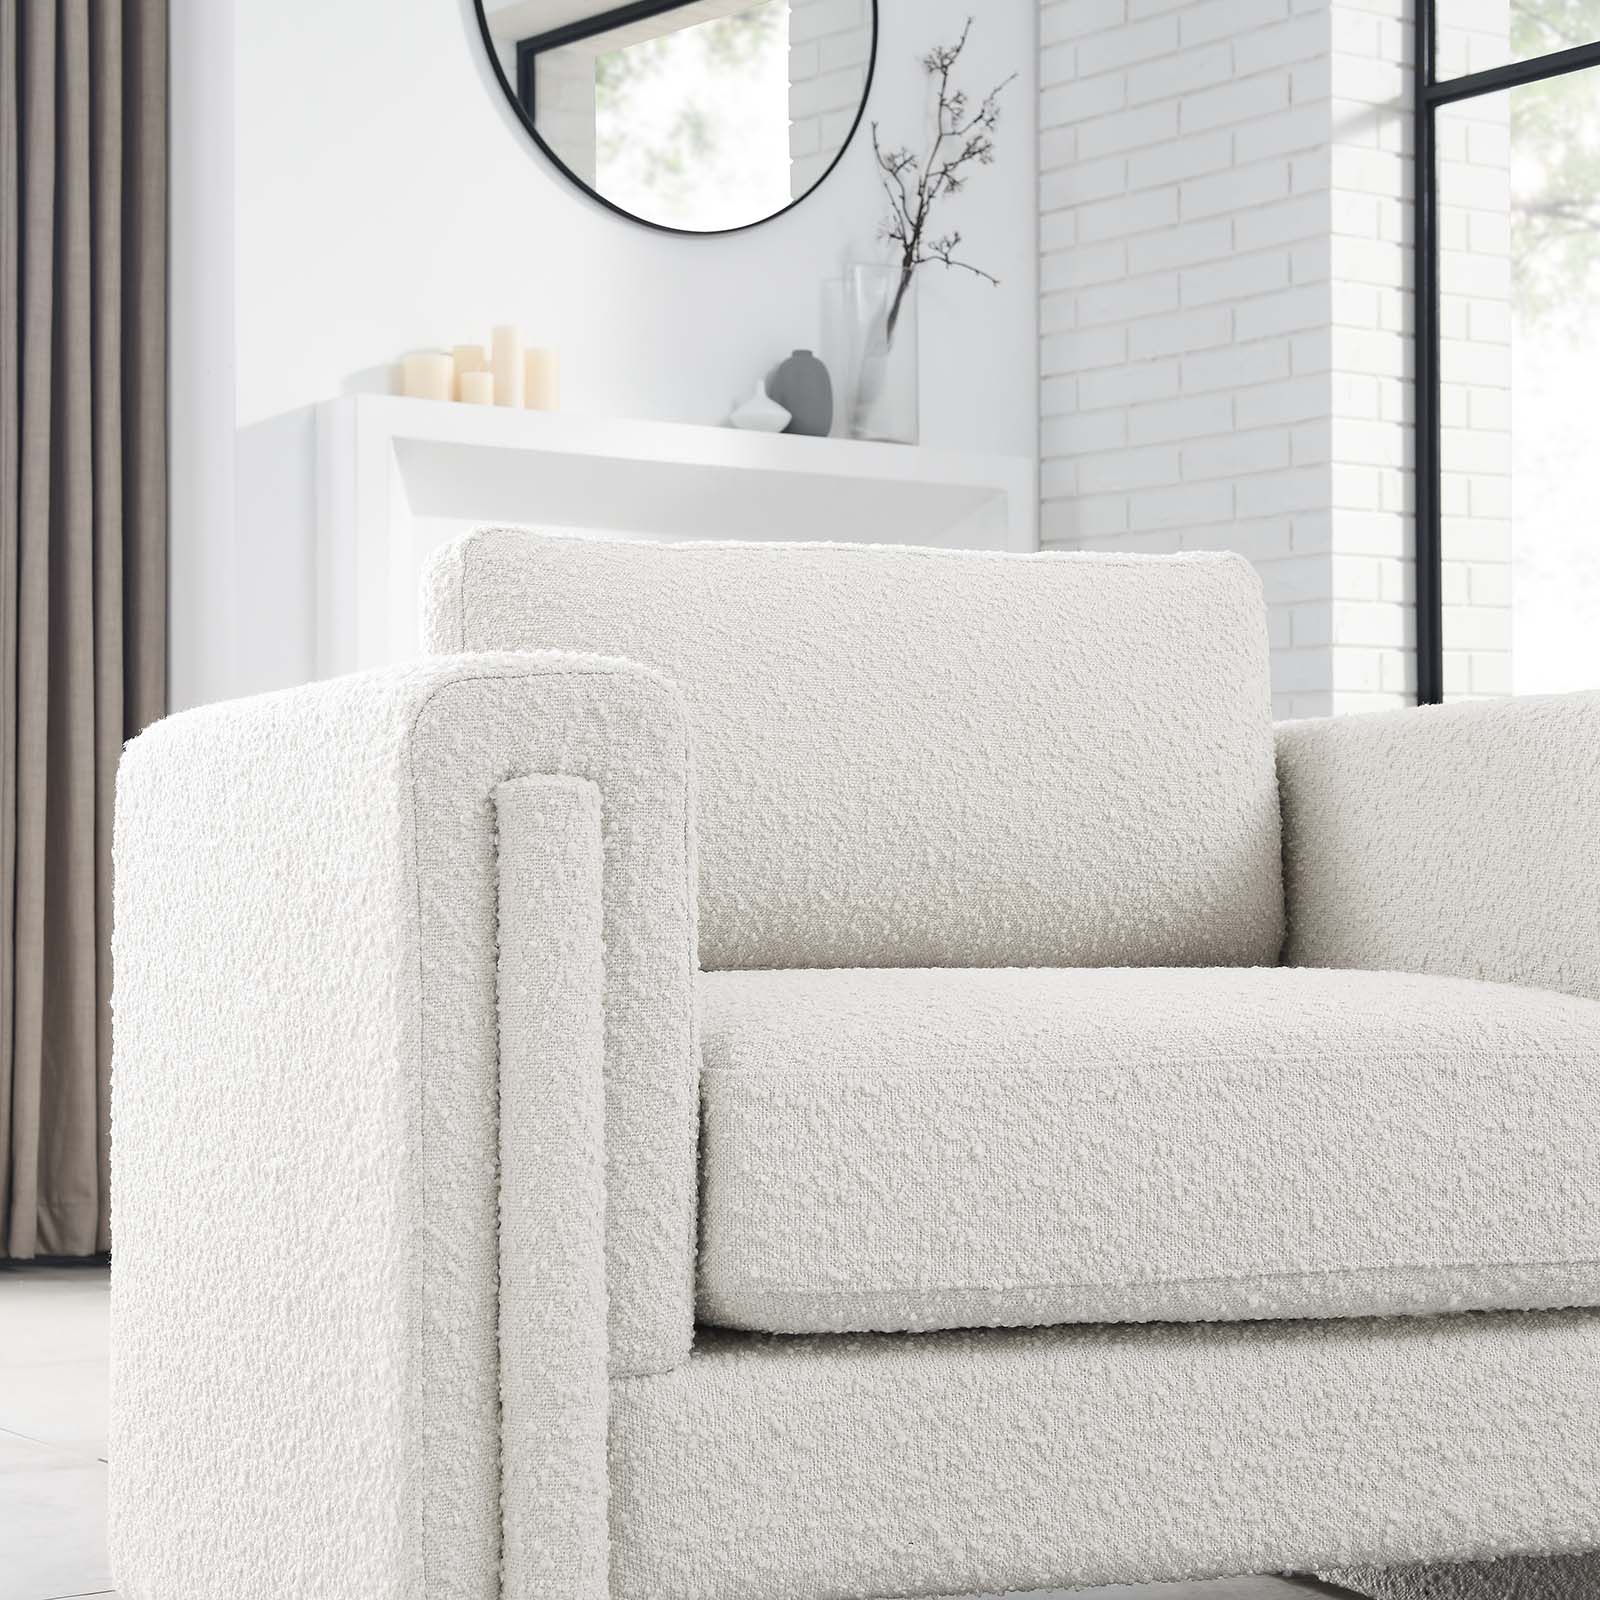 Visible Boucle Fabric Armchair - East Shore Modern Home Furnishings